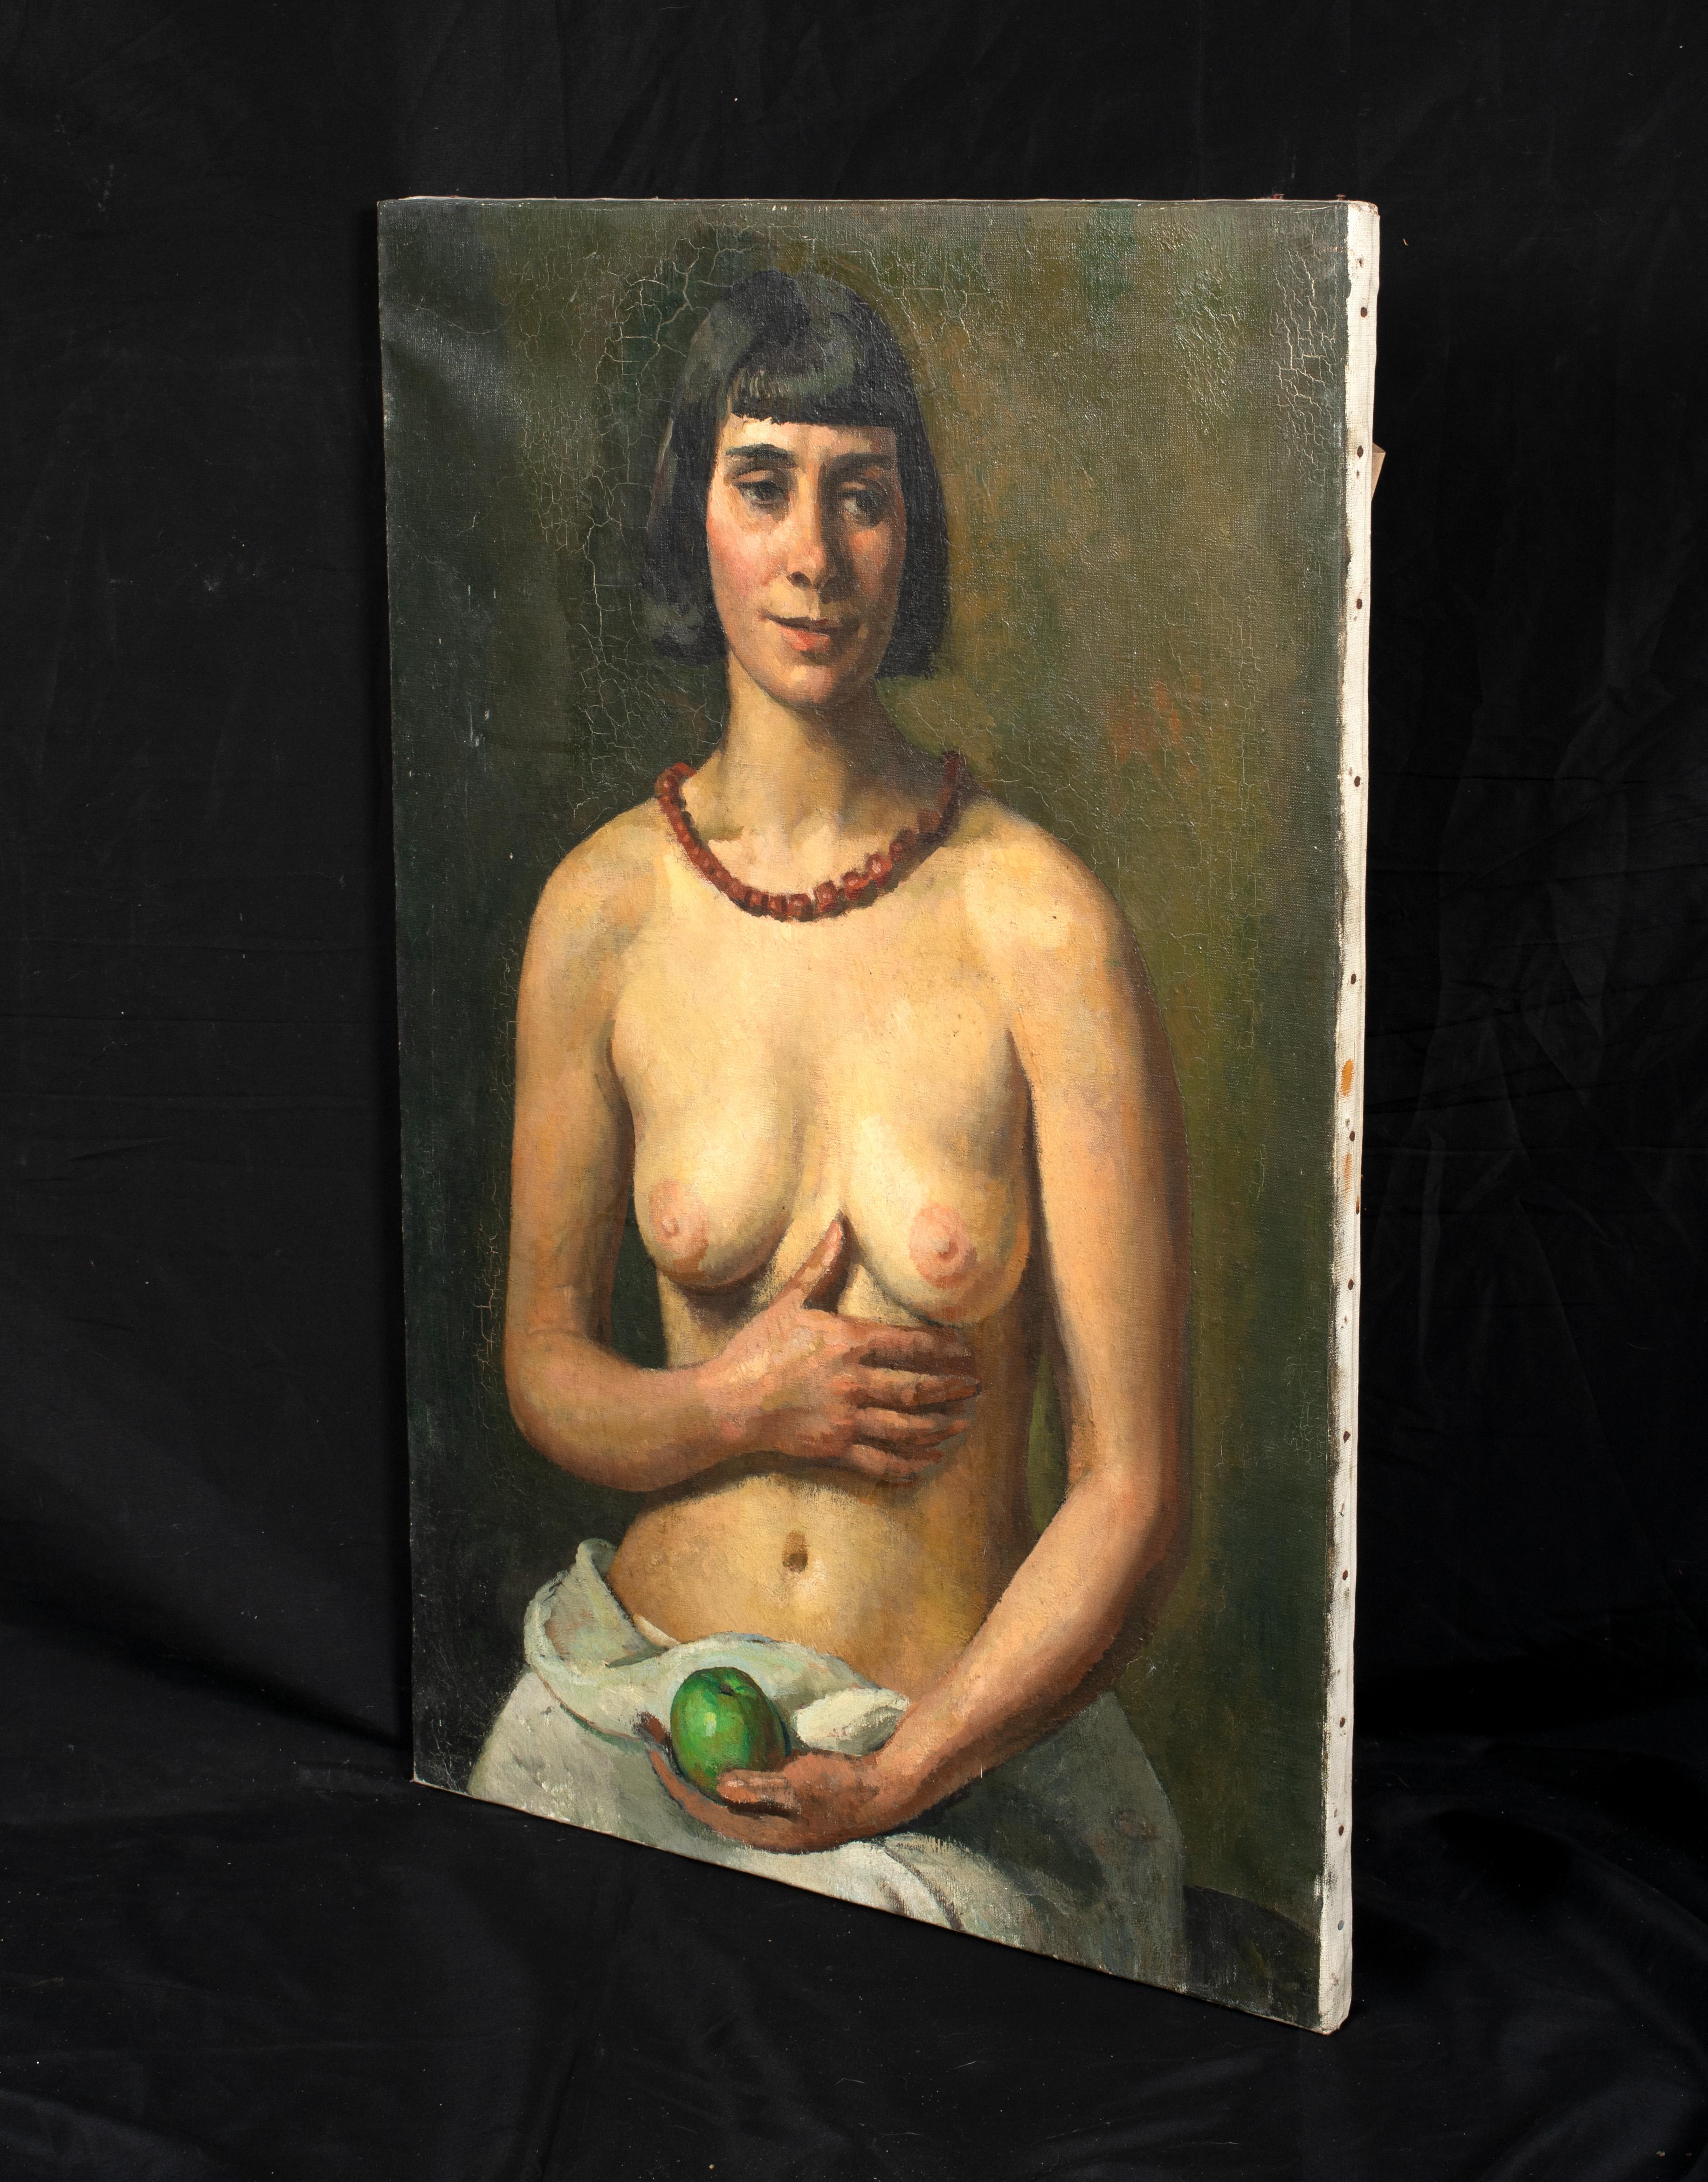 Portrait Of A Nude Holding An Apple, early 20th Century 

by Lionel Ellis (1903-1988)

Large early 20th Century English portrait of a nude holding an apple, oil on canvas by Lionel Ellis. Excellent quality and condition half length portrait of the